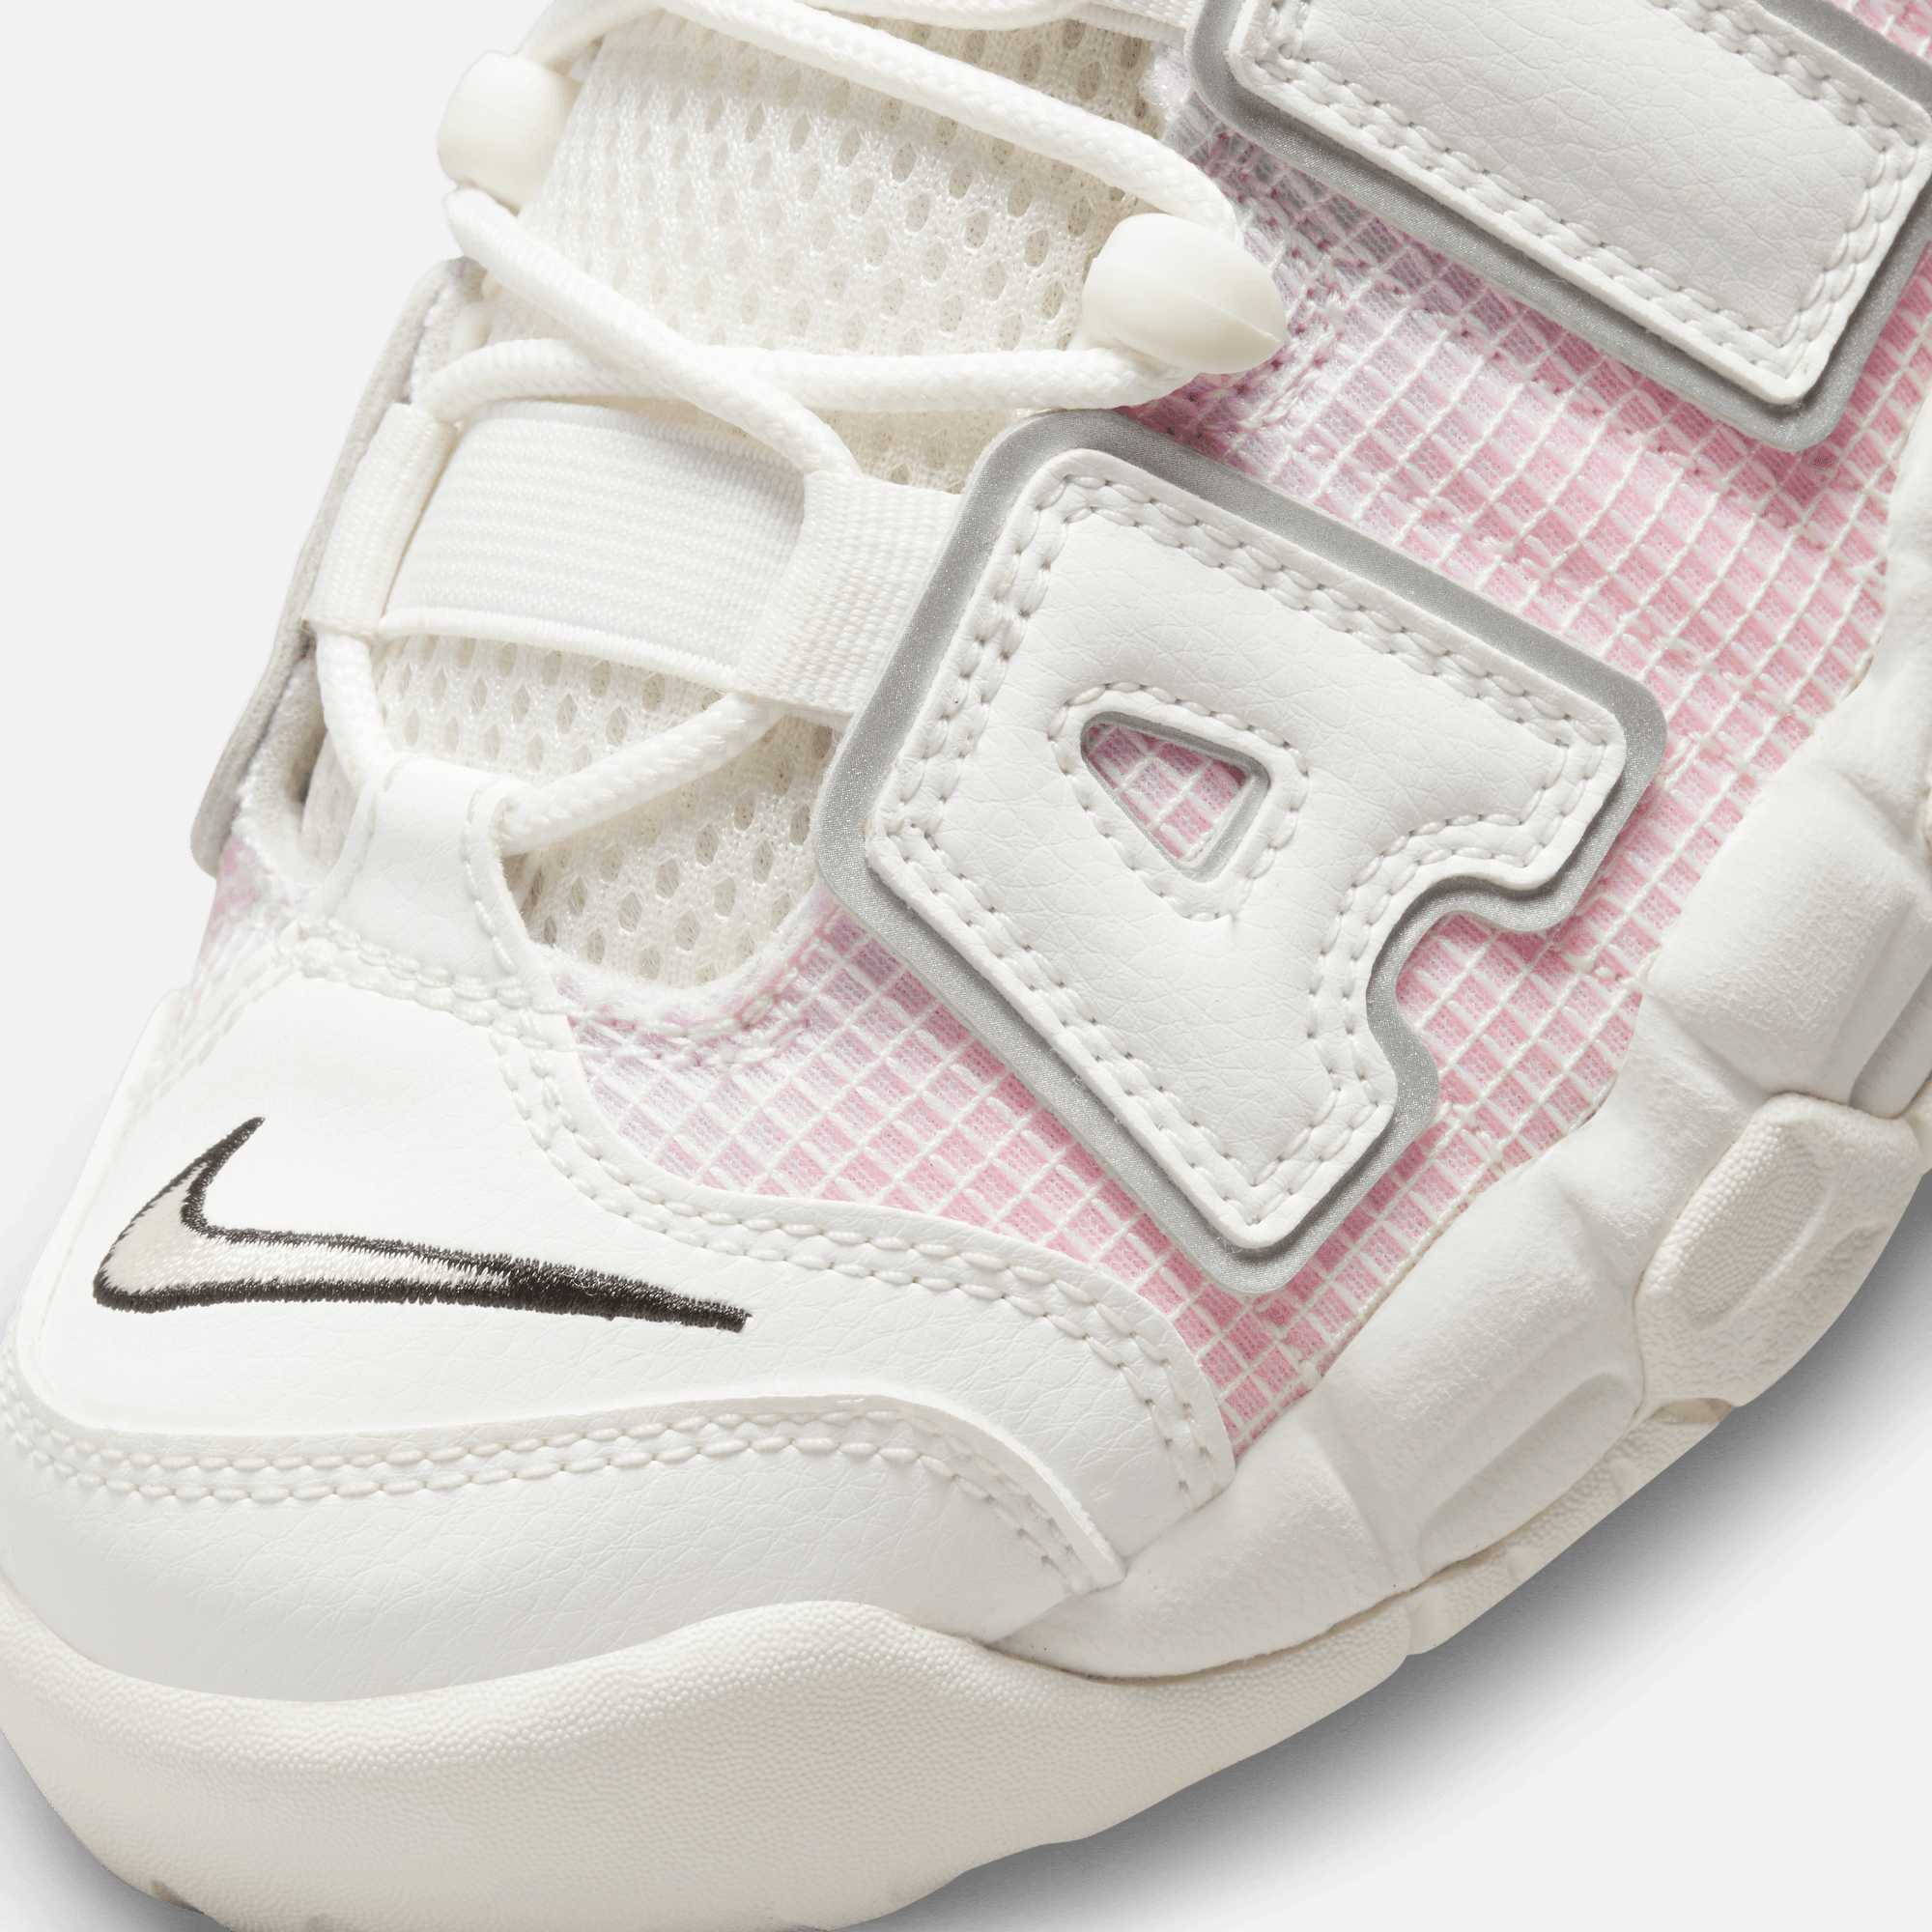 Nike Air More Uptempo (GS) Gradient Nike